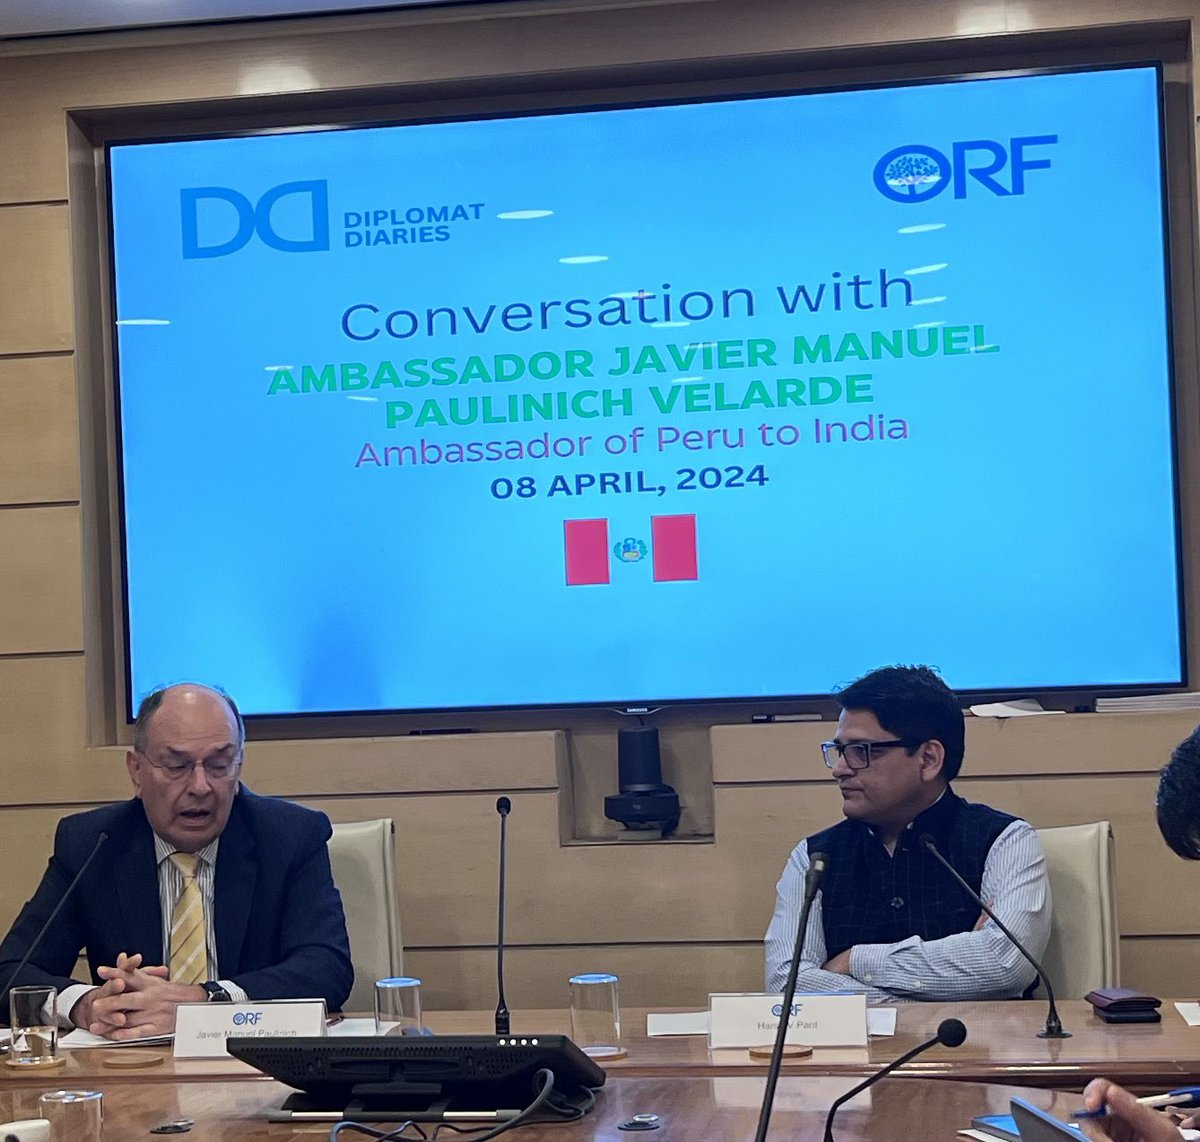 Javier Manuel Paulinich Velarde, Ambassador of #Peru to India in this month’s edition of @orfonline ‘Diplomat Diaries’ shares his insights on the free-trade deal, regional order, U.S-PRC contest, development of #Chancay megaport deal where #China is a main investor.